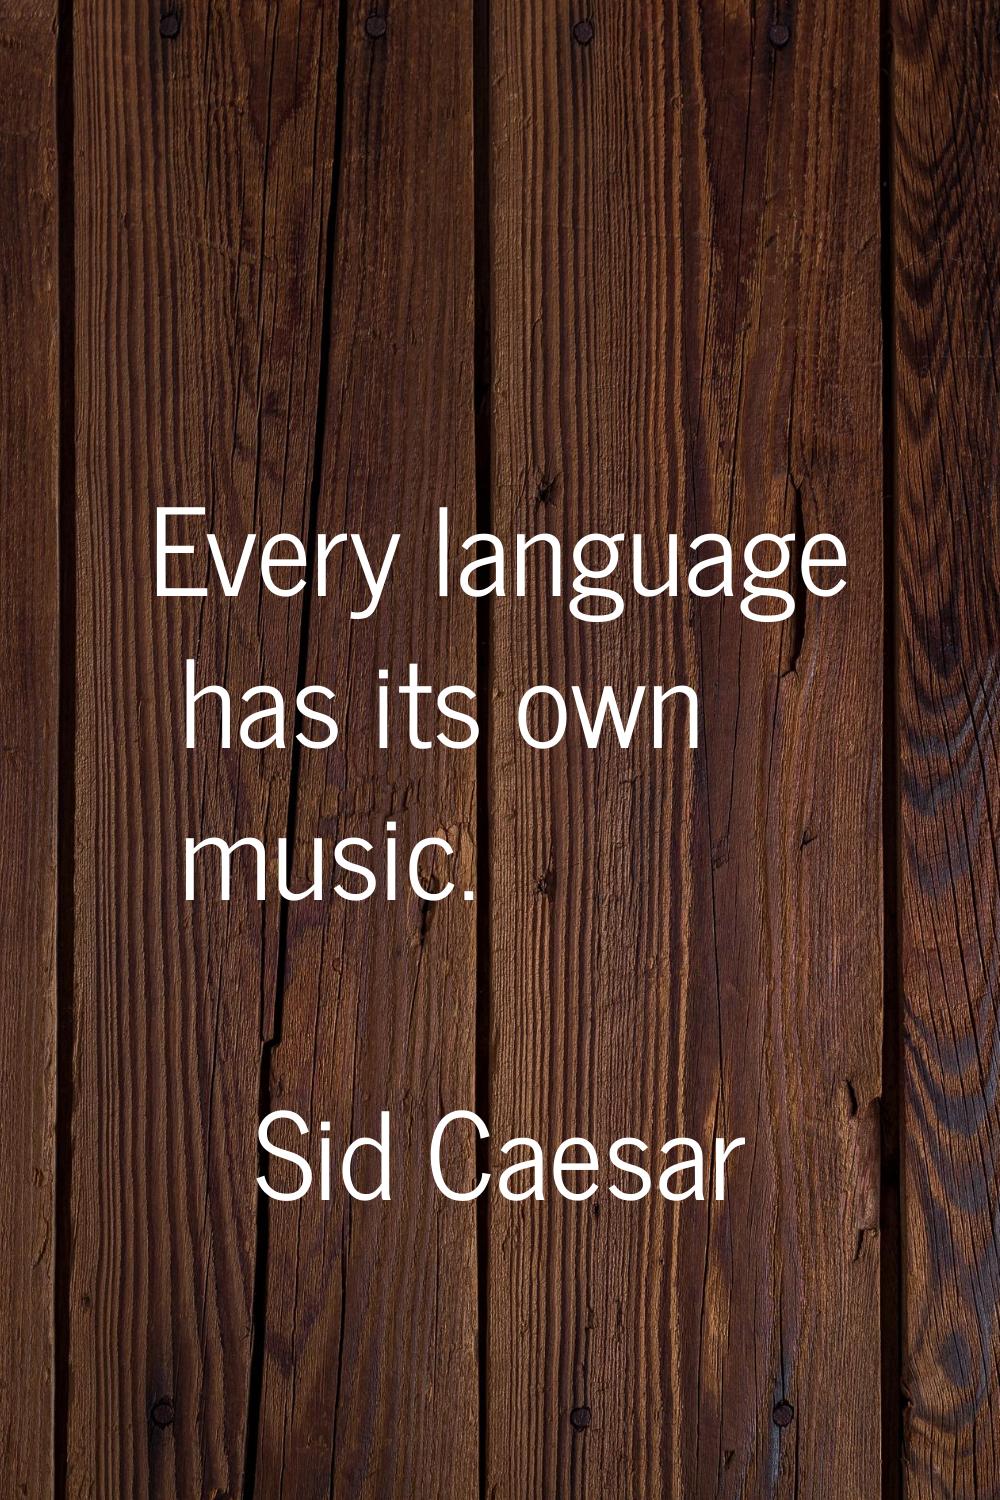 Every language has its own music.